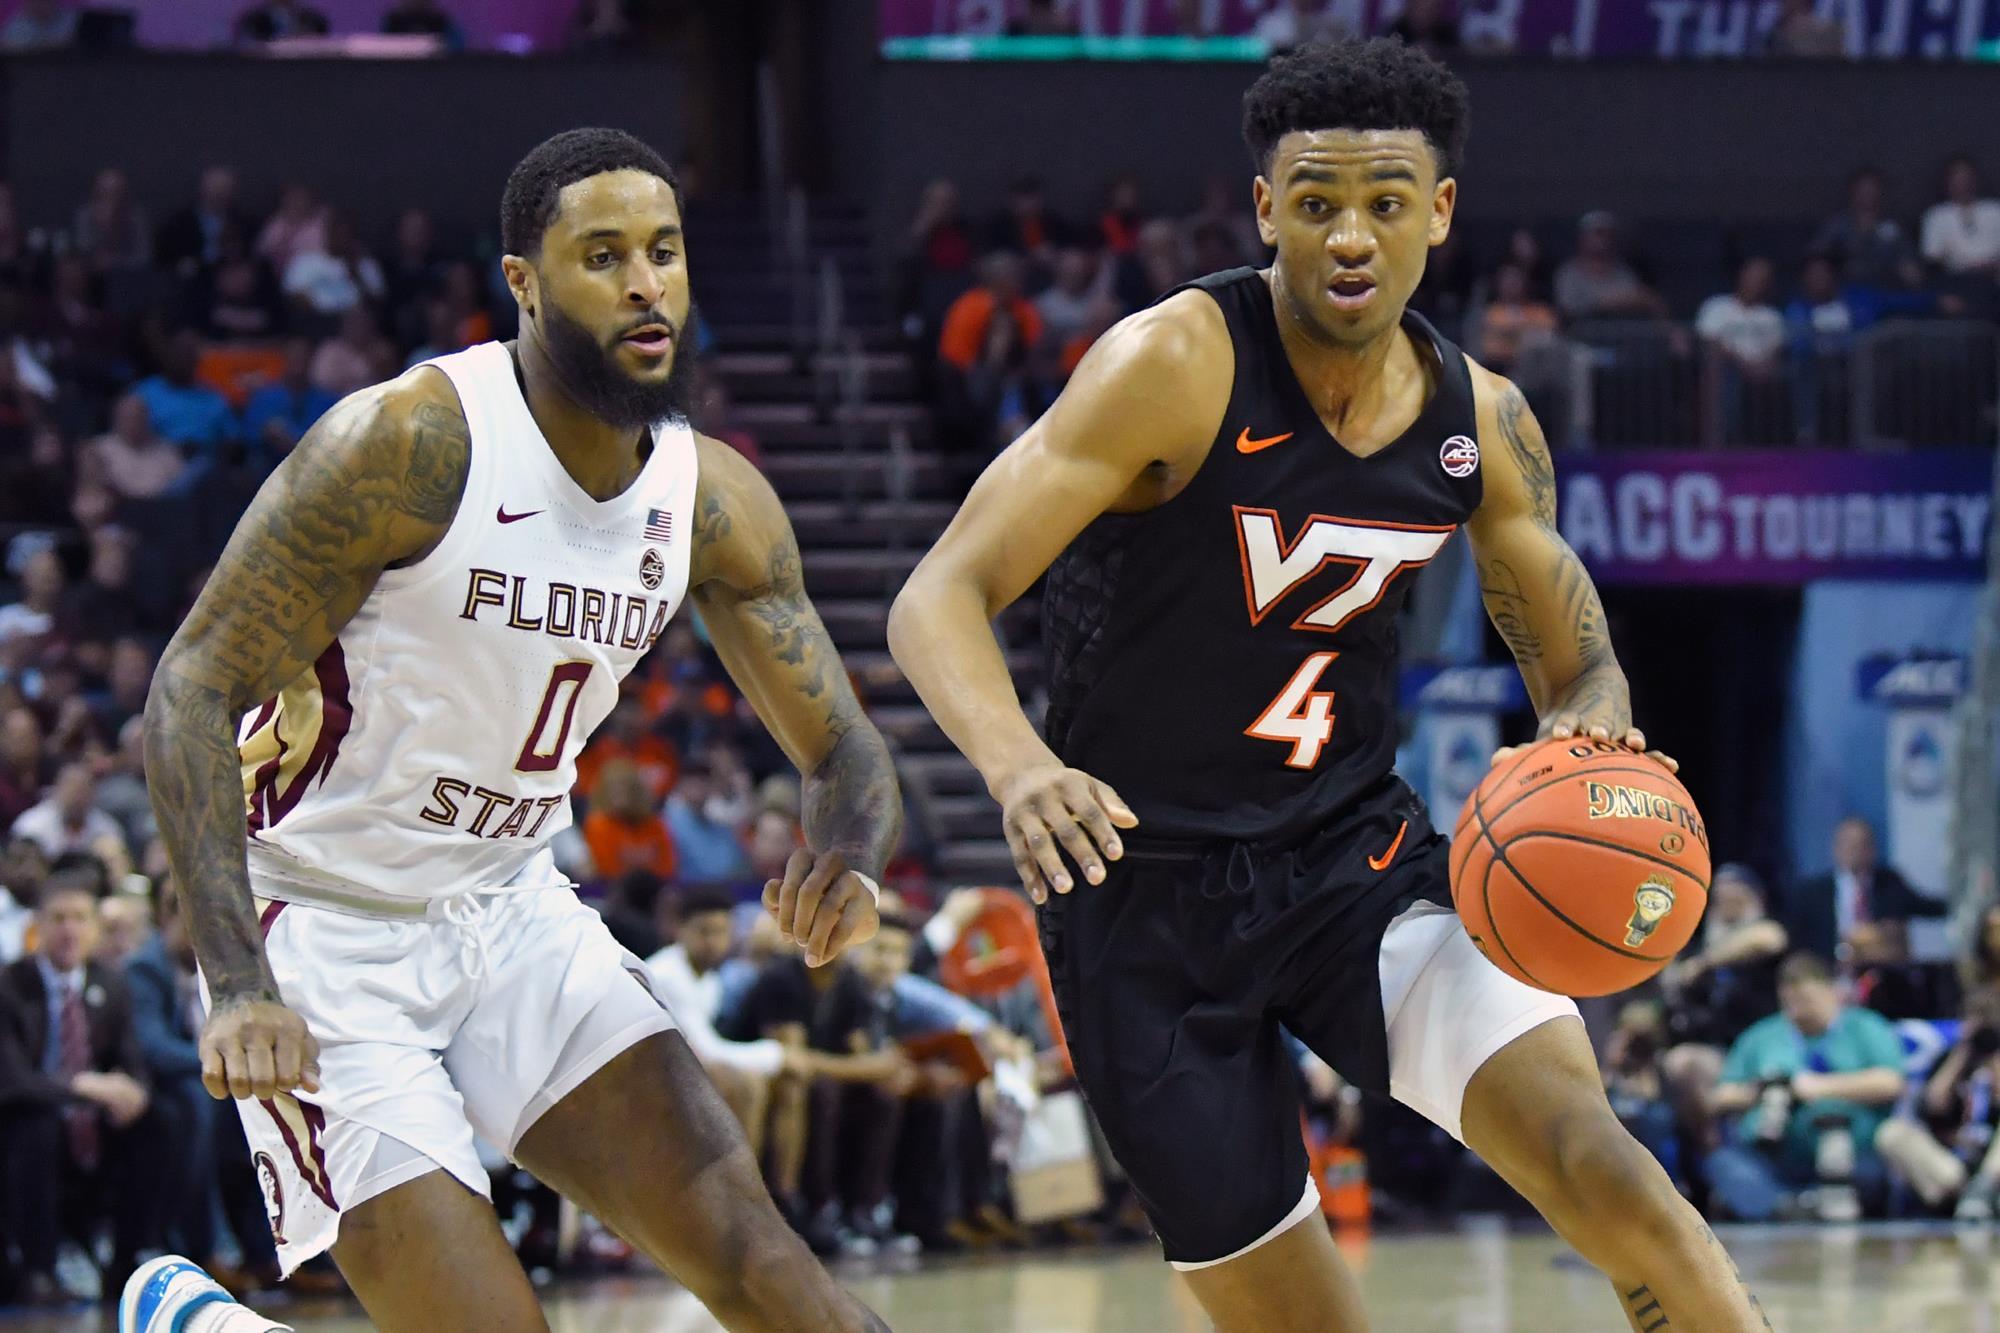 Tech falls to Florida State in quarterfinals of ACC